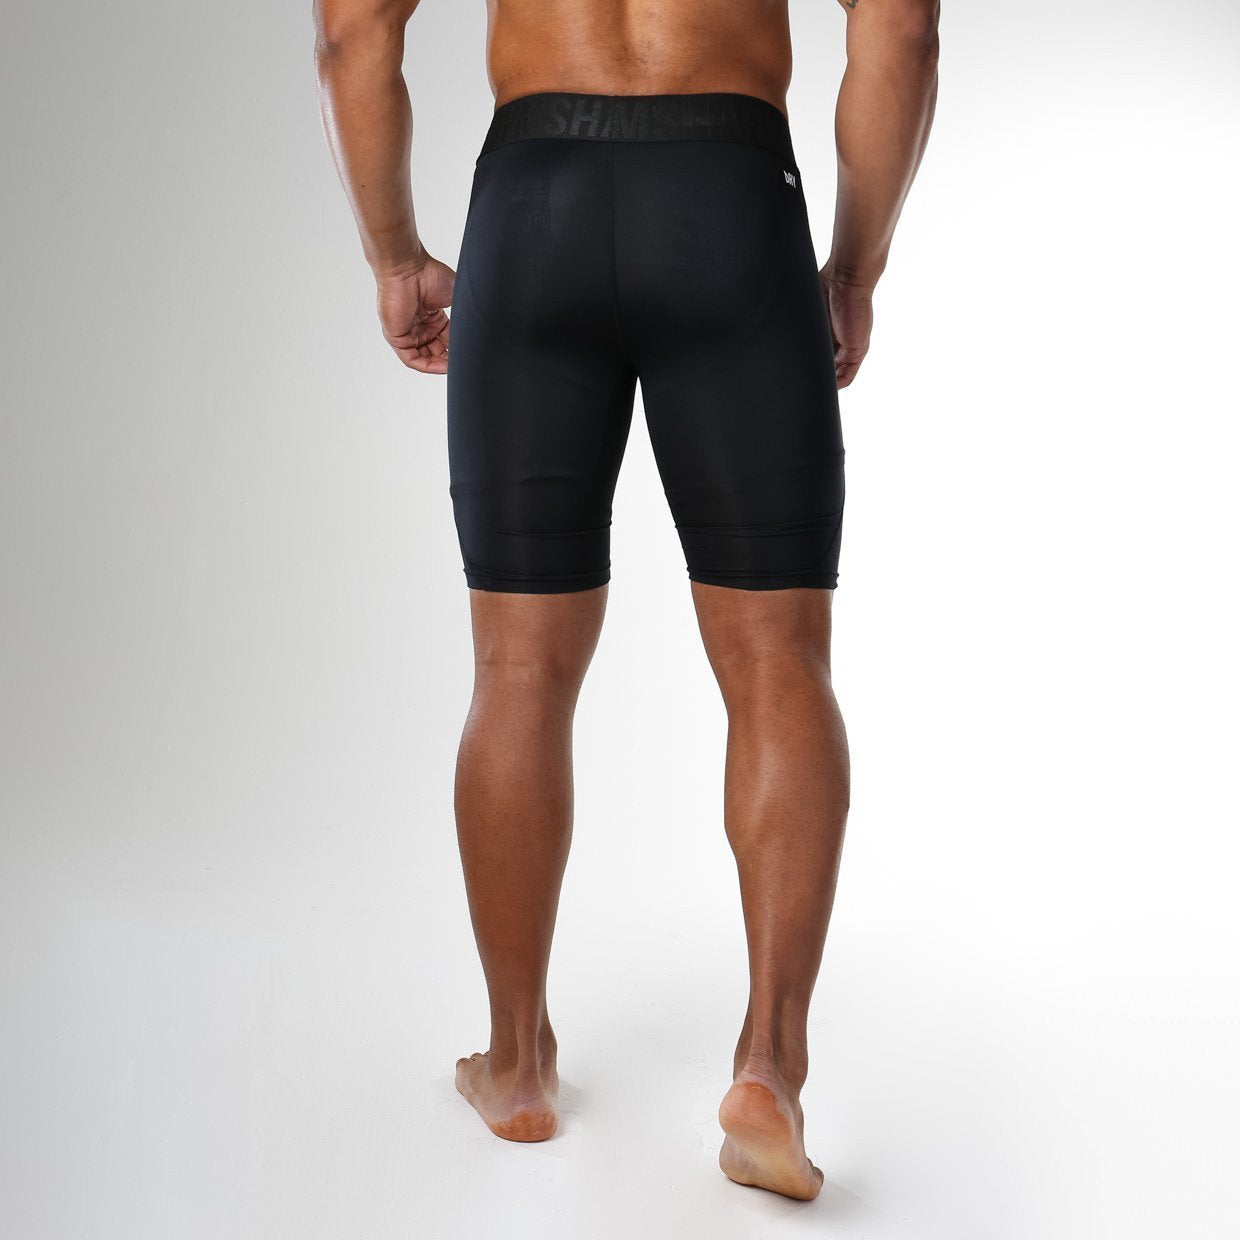 Element Compression Shorts in Black - view 2